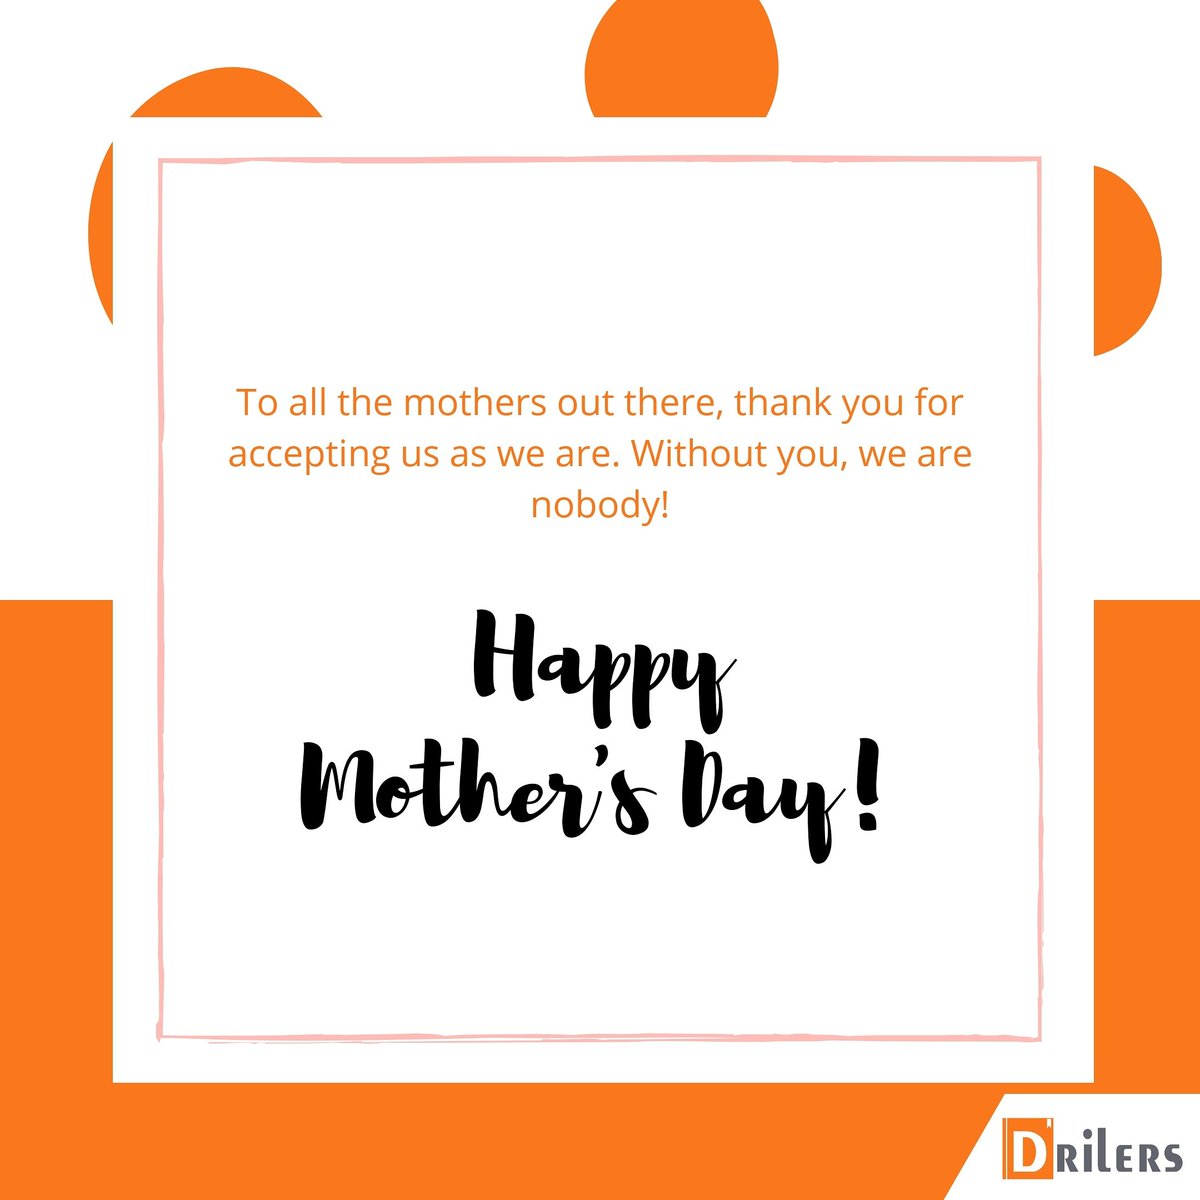 Drilers wishes a very Happy Mother's Day to all the supermoms! ♥️

#mothersday #happymothersday #mothersday2020 #supermoms #instamoms #mothersofinstagram